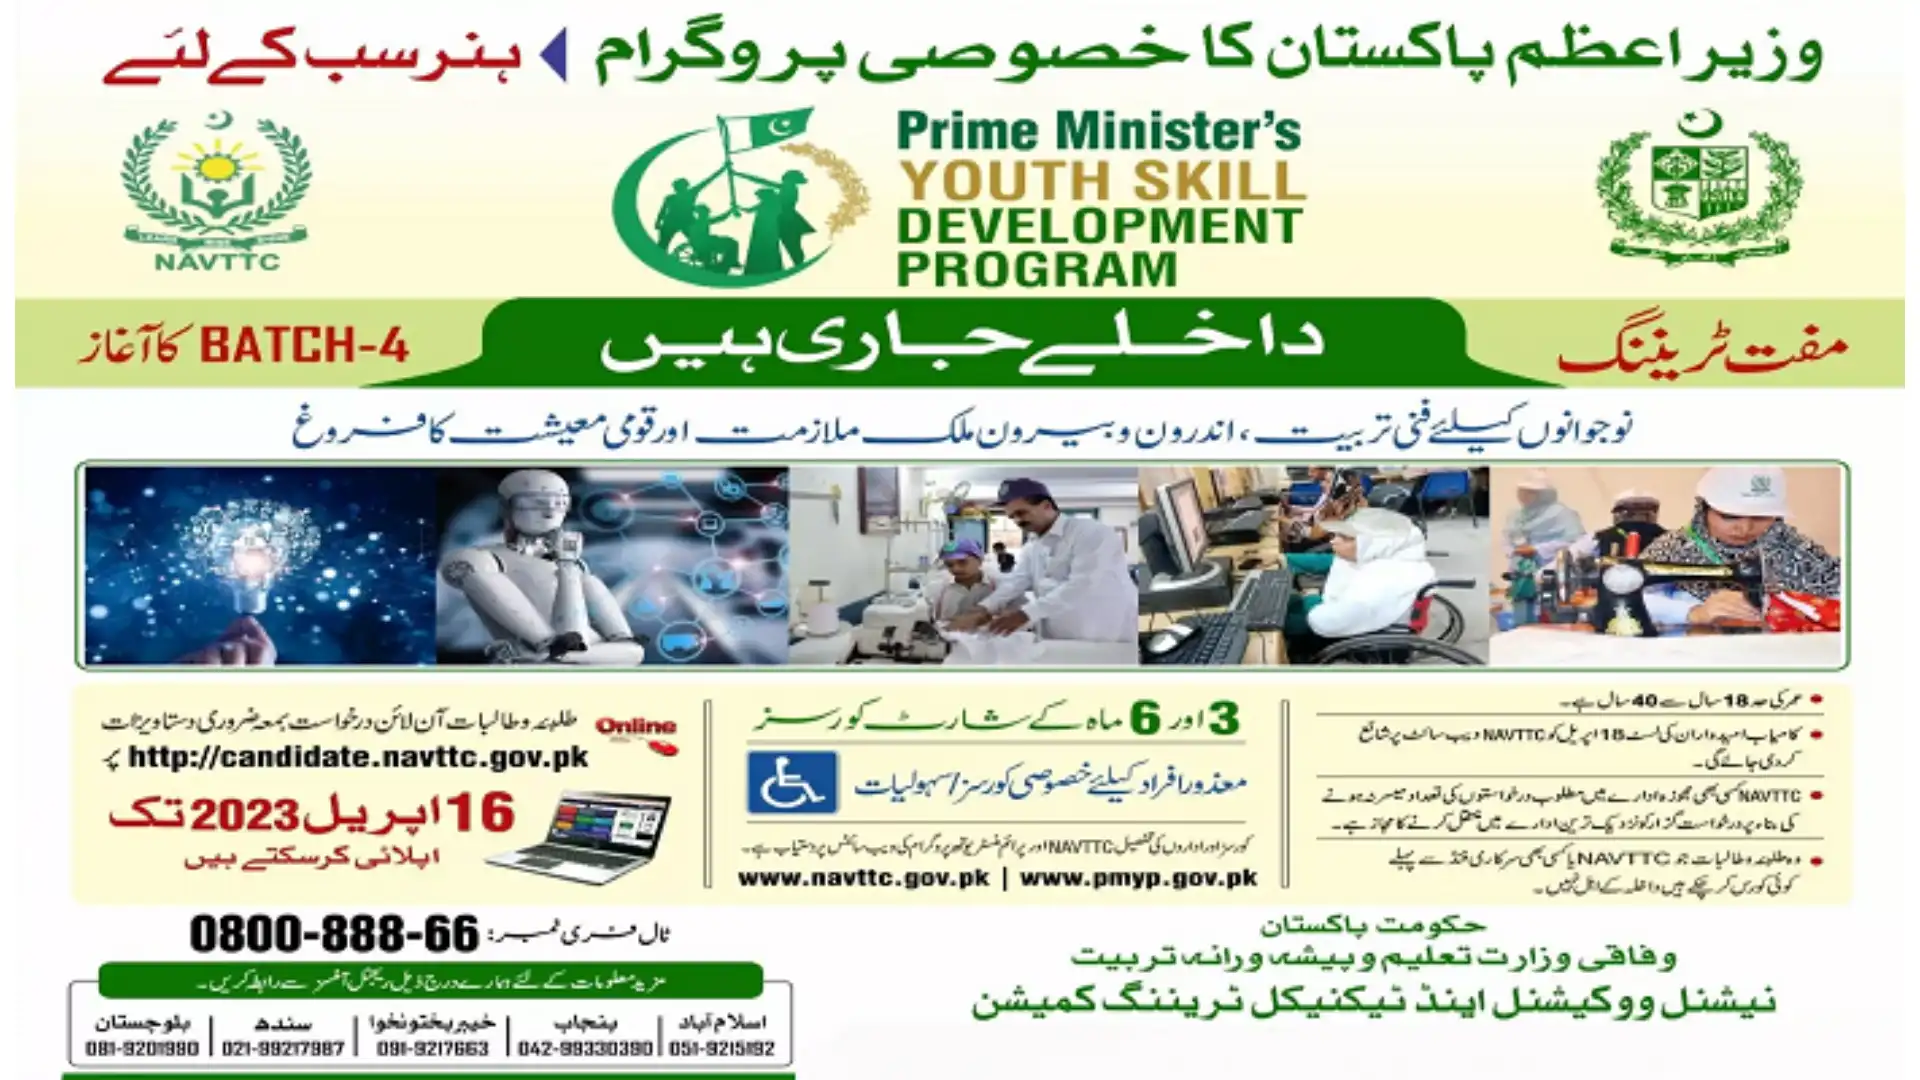 What are the objectives of the PM Youth Program